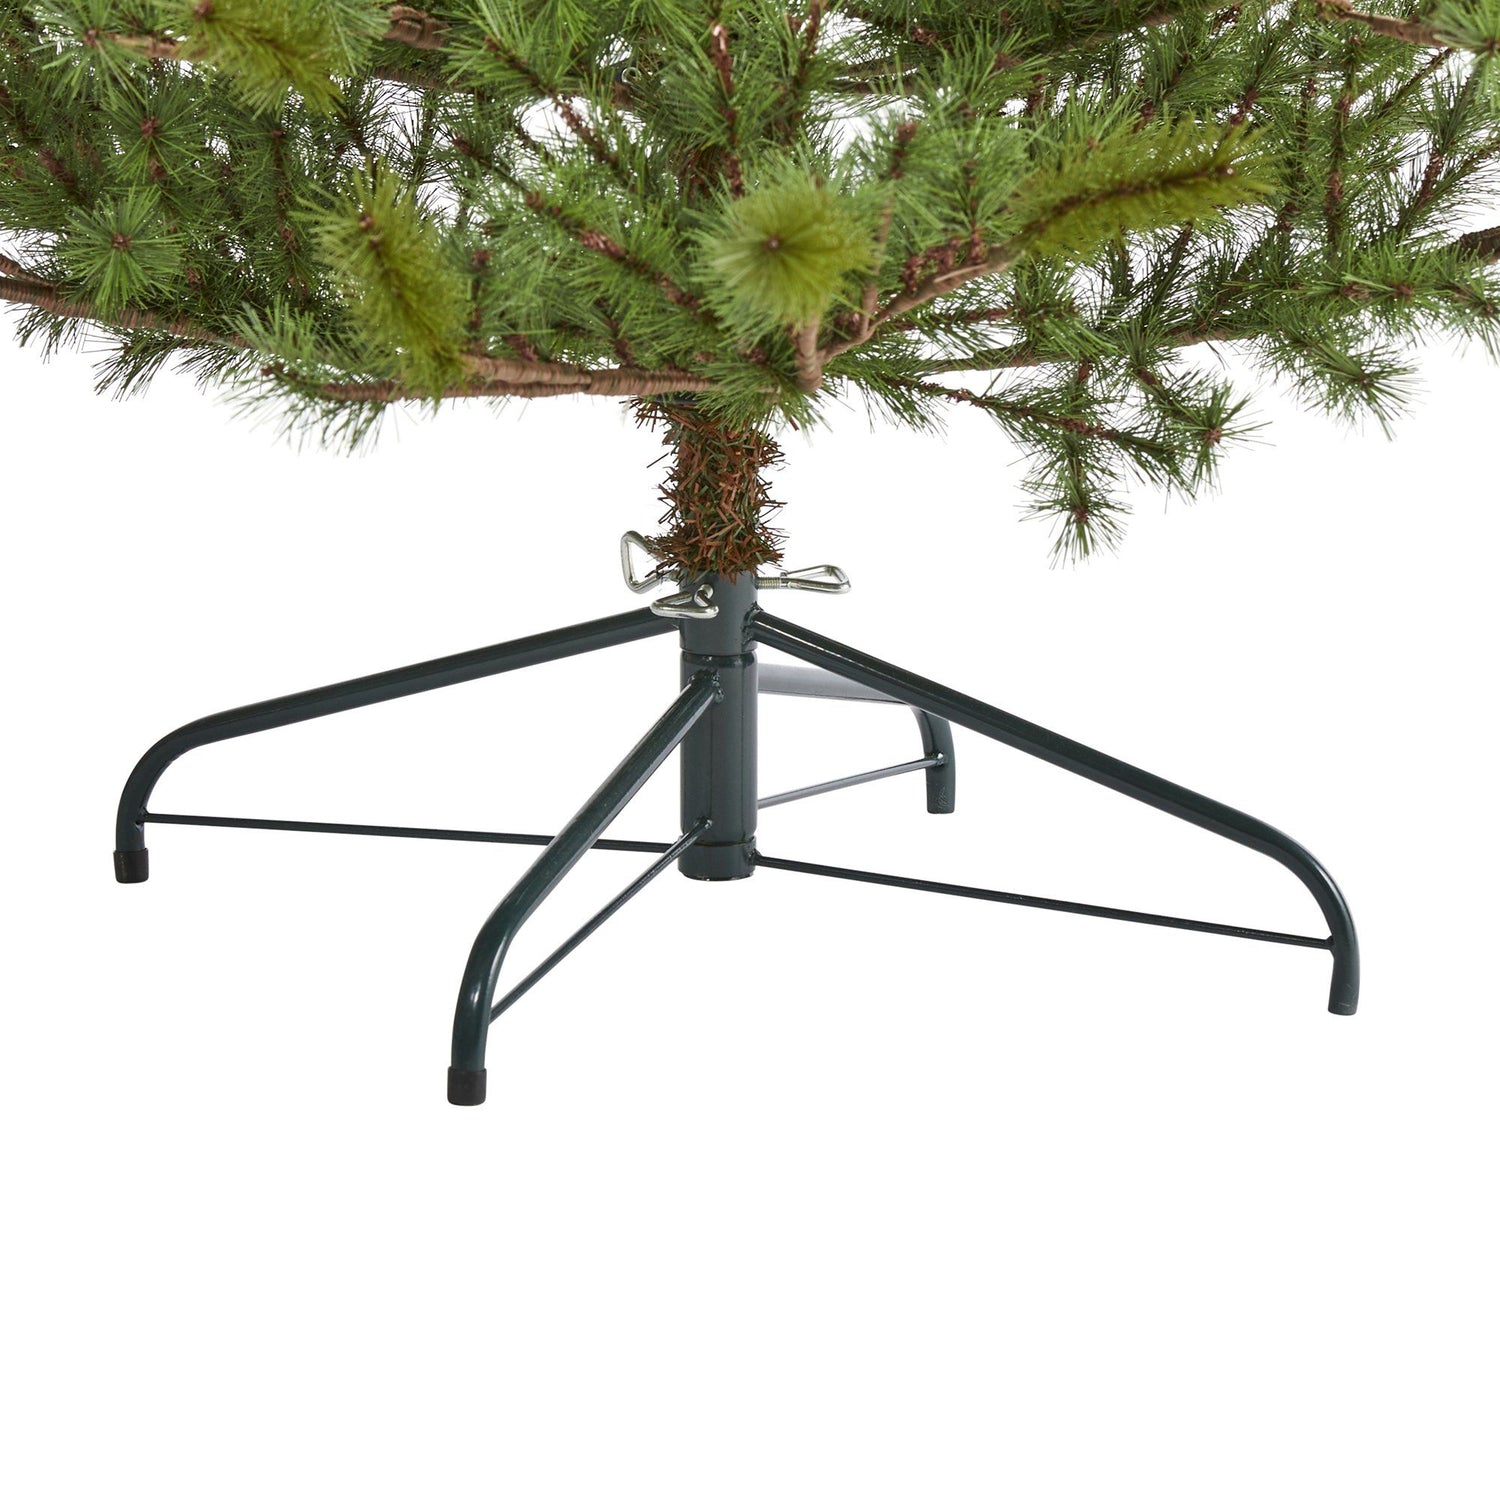 7’ Vancouver Mountain Pine Artificial Christmas Tree with 374 Bendable Branches